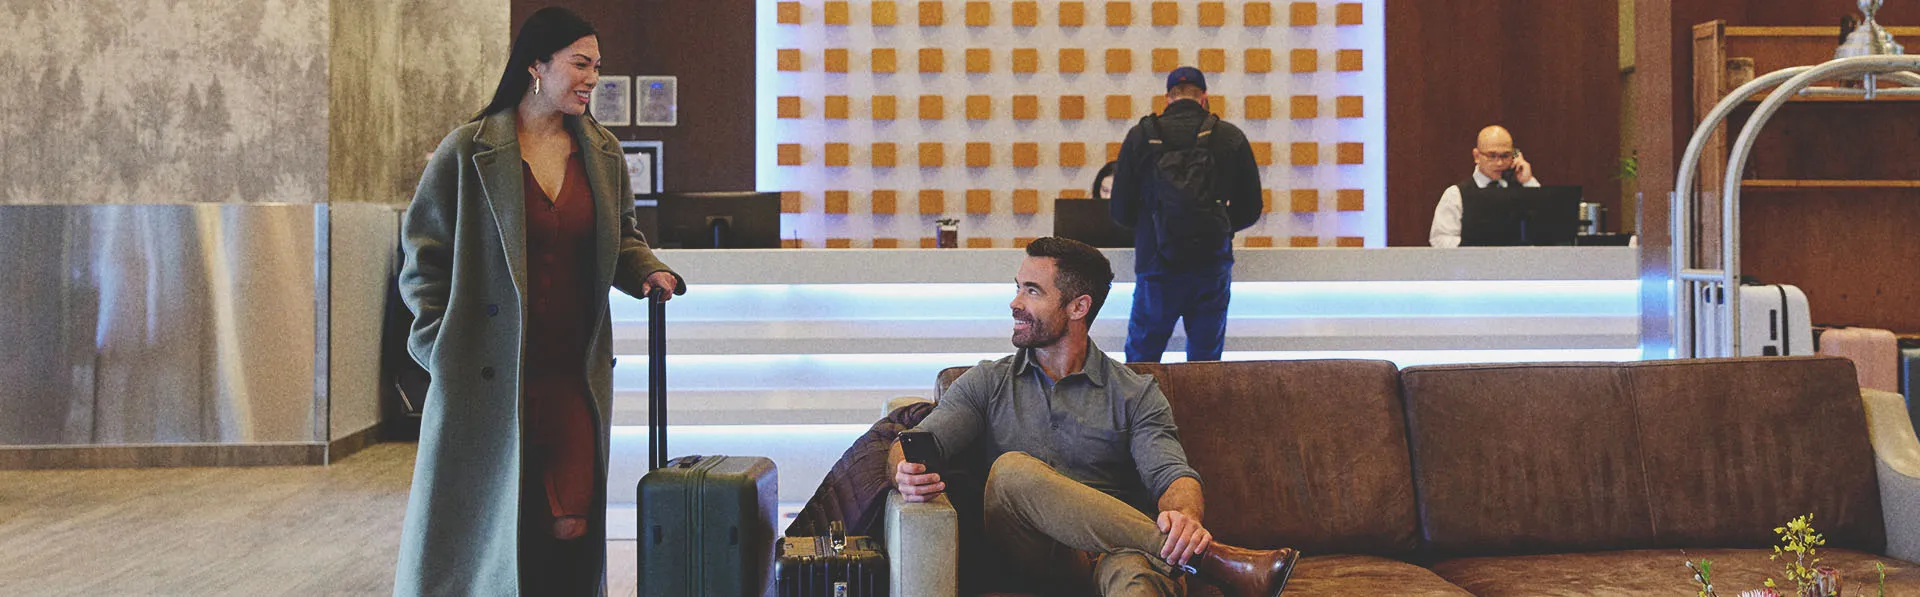 two people greet each other in the lobby of a Calgary Hotel